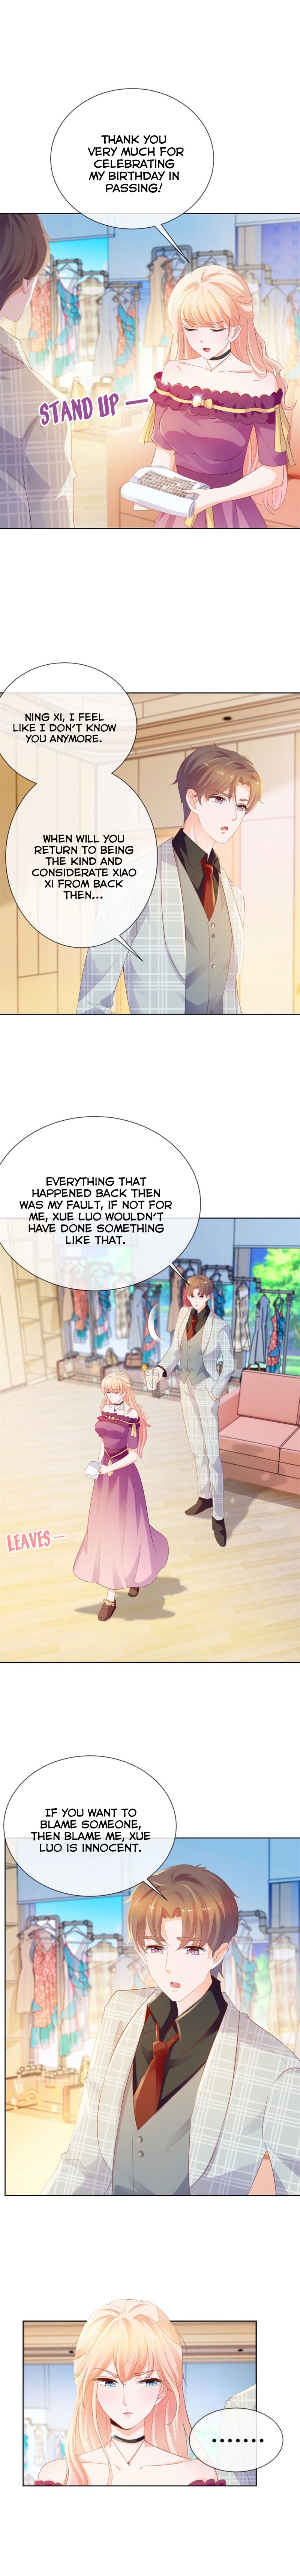 Full Marks Hidden Marriage: Pick Up a Son, Get a Free Husband ch.57